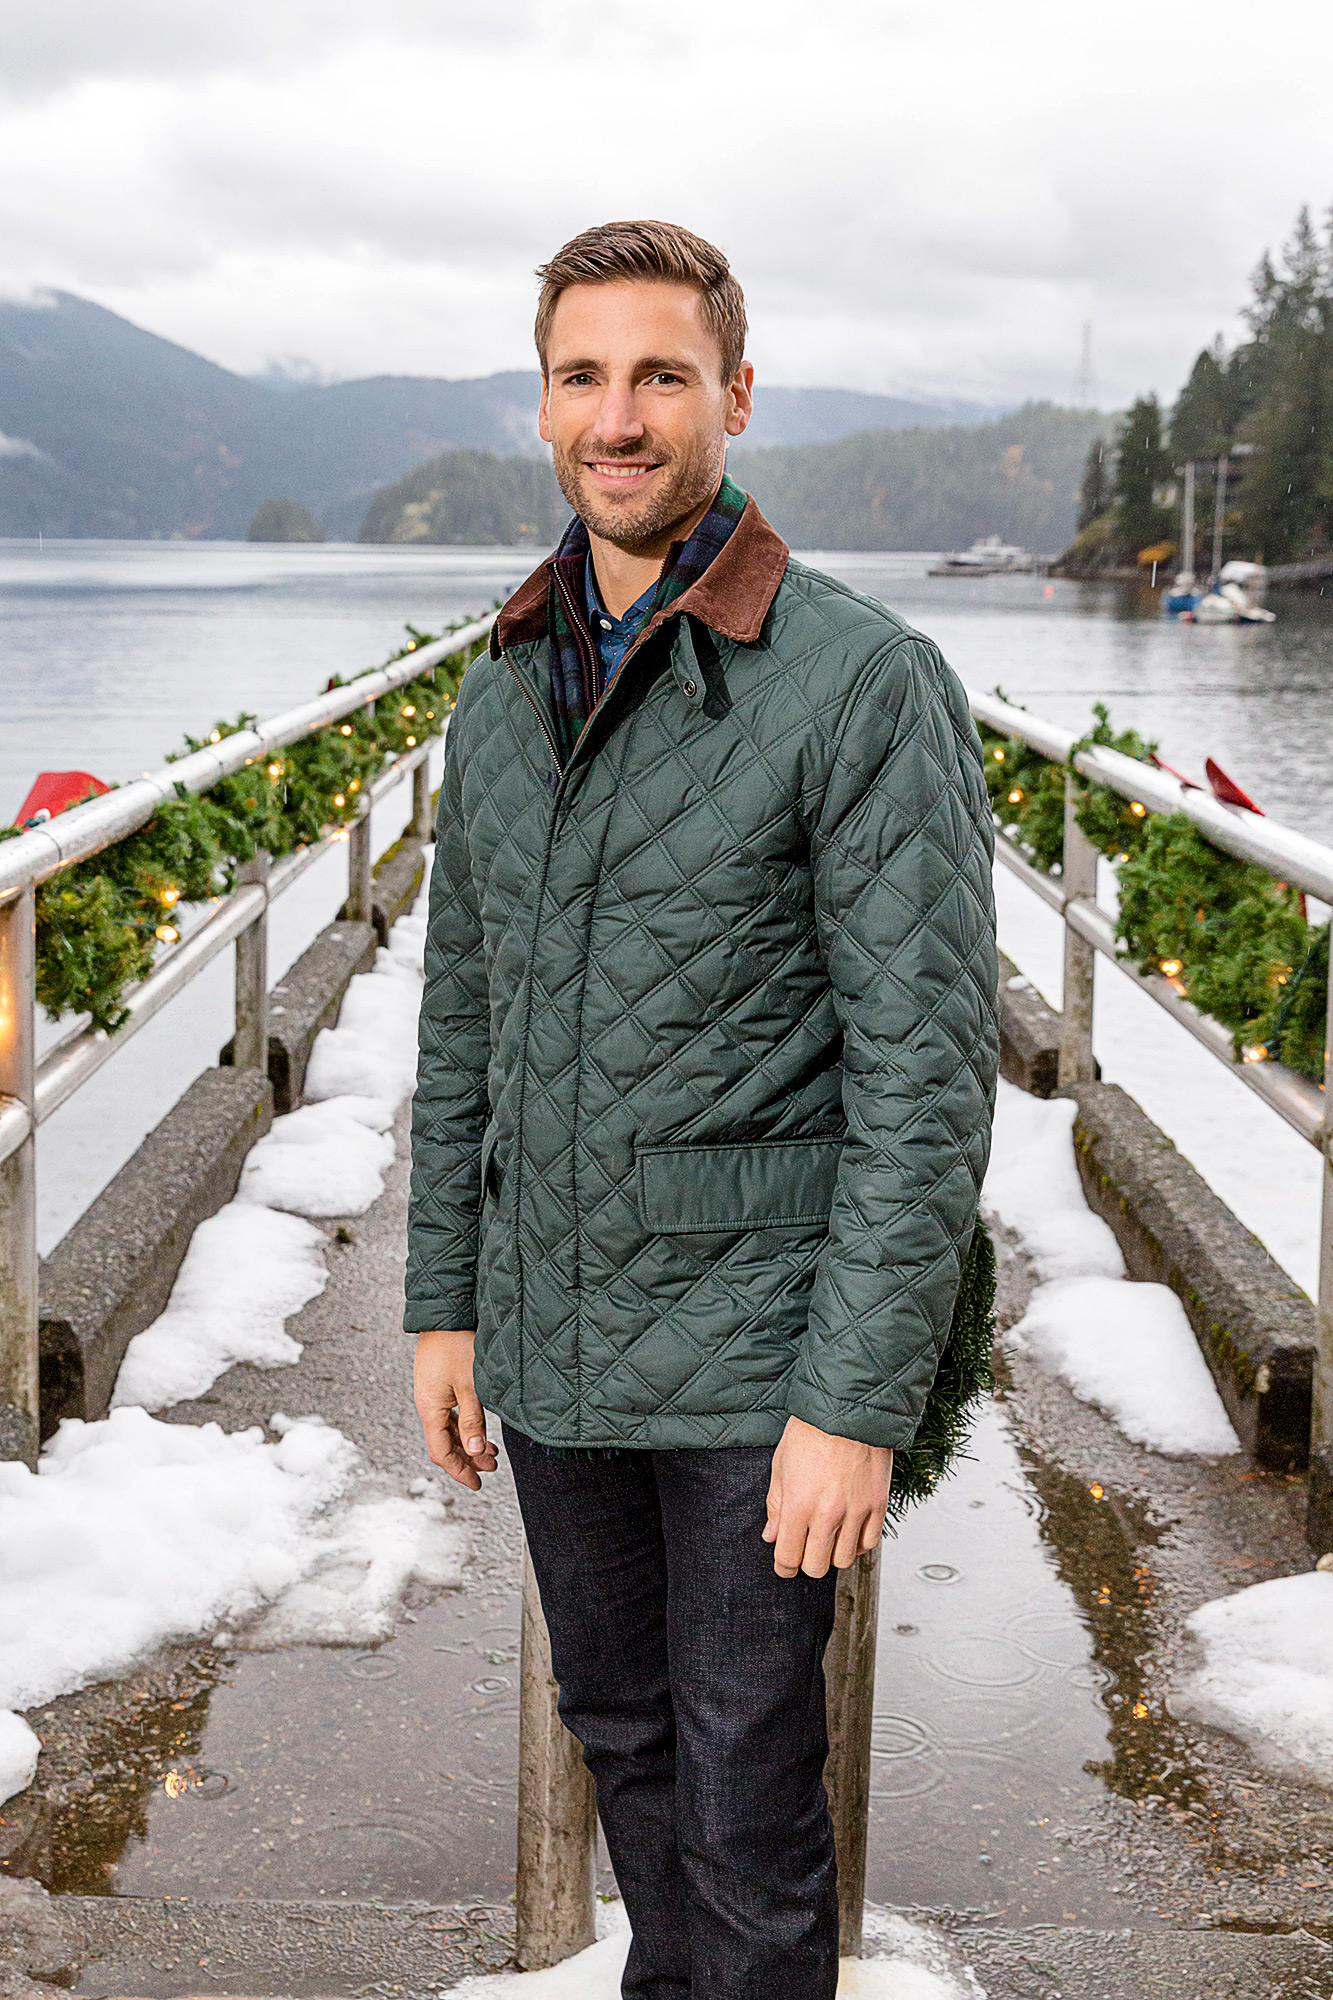 Andrew Walker on Hallmark Reunion With Tyler Hynes, Paul Campbell pic image